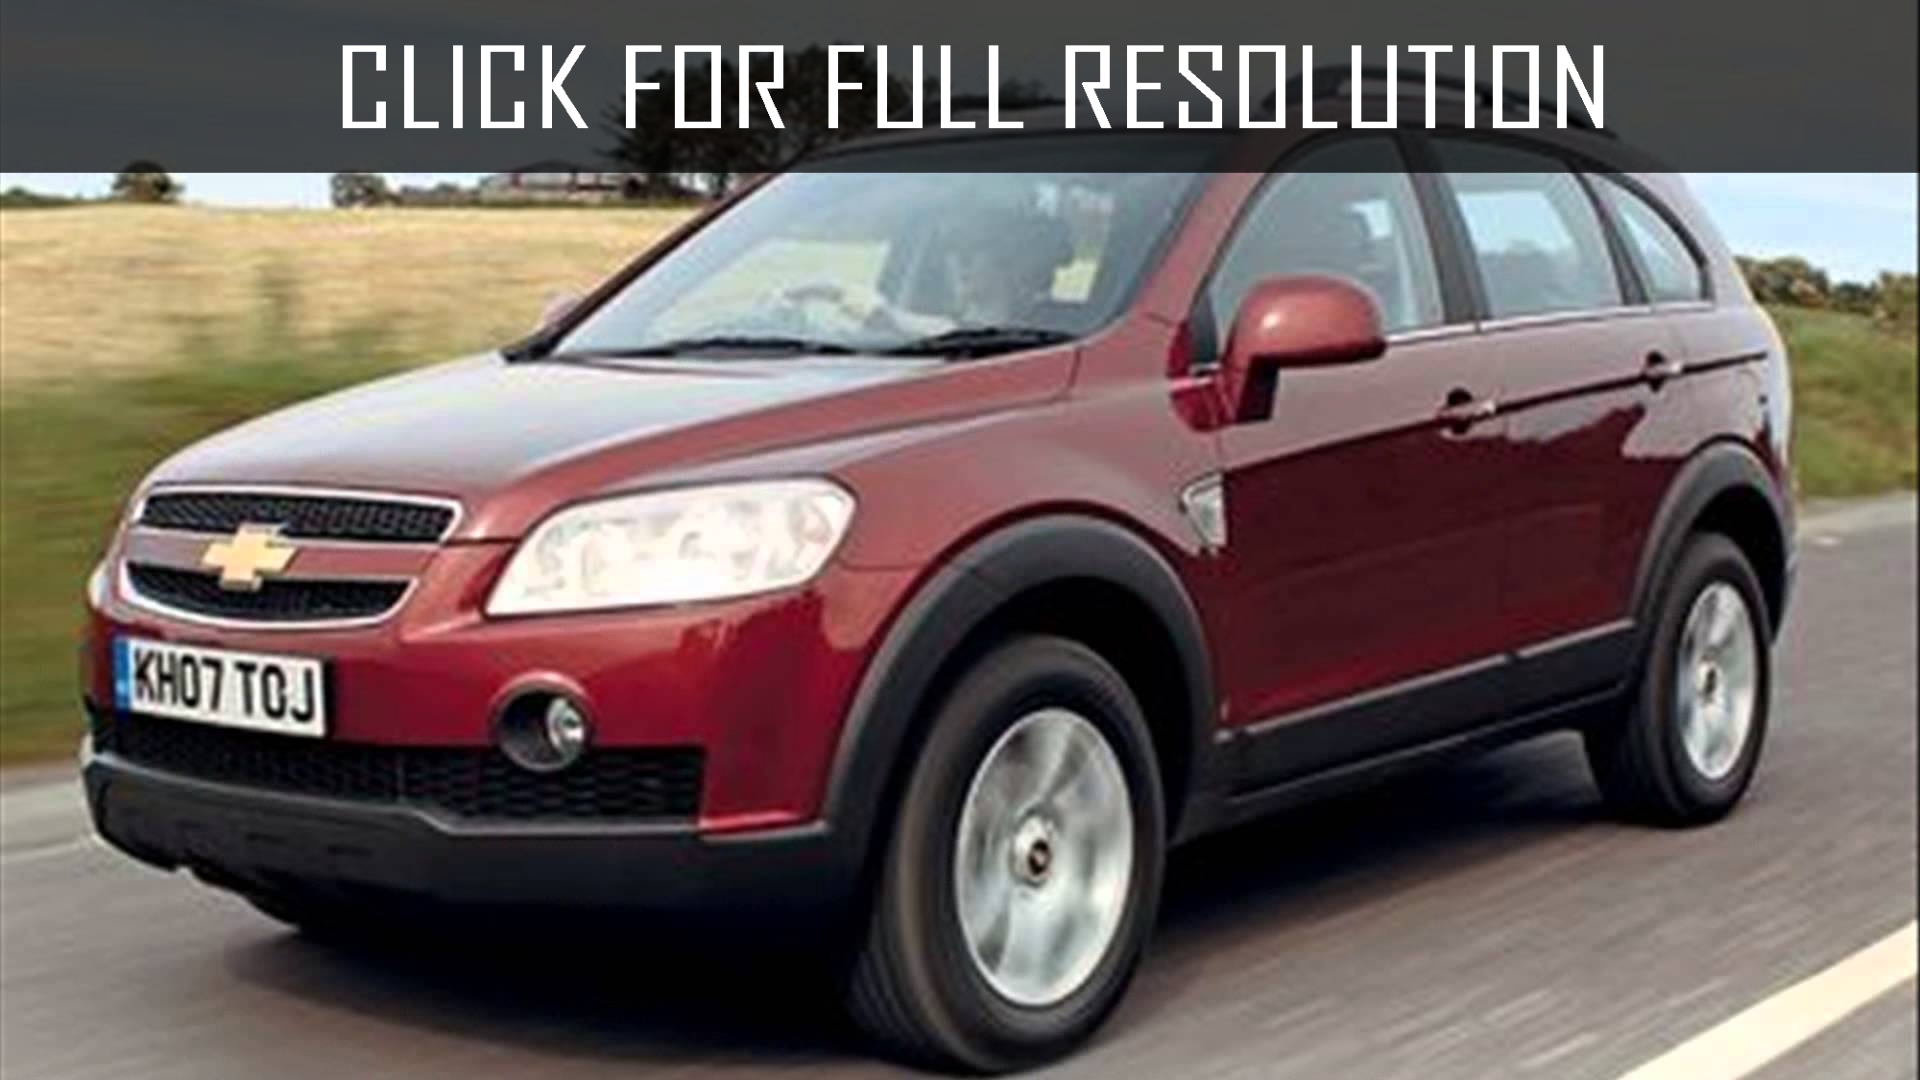 Chevrolet Captiva 2008 reviews, prices, ratings with